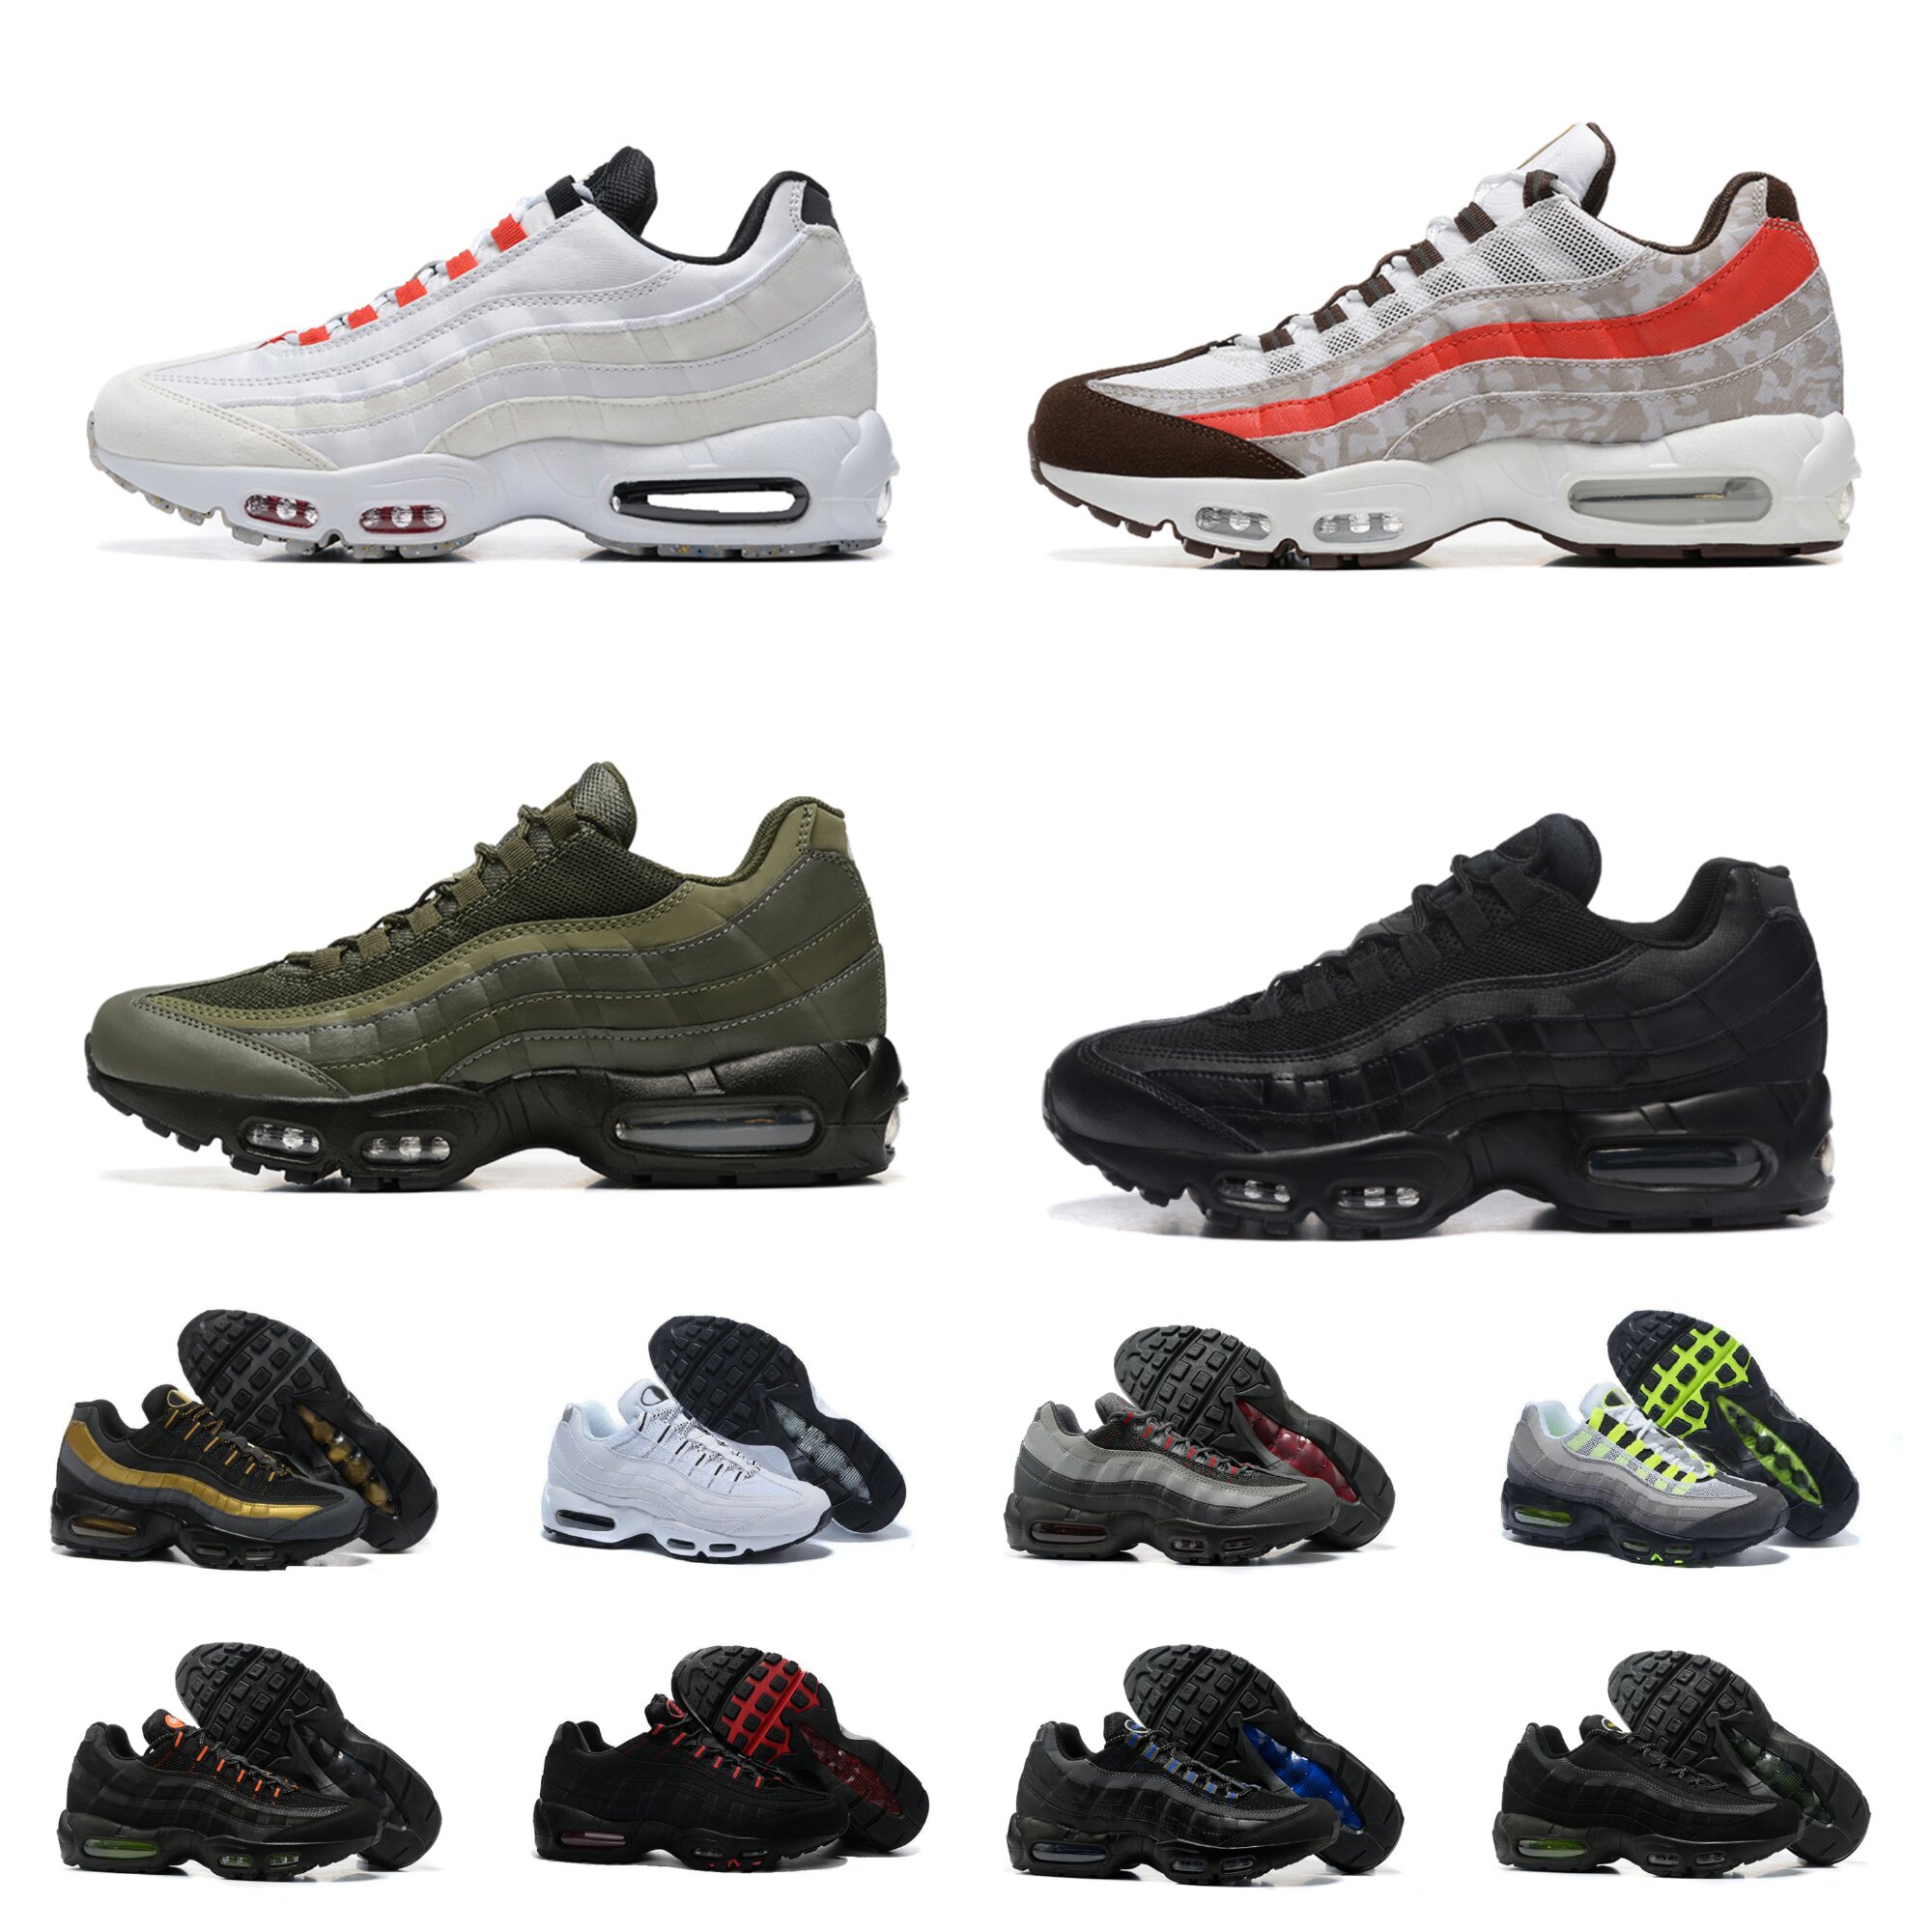 

Classic Max 95 OG Mens Casual ShOes Air 95s Triple Black White Navy Blue Neon Soft Sole Solar Red Smoke Grey Greedy 3.0 Sneakers 20th Anniversary Grape Designer Trainers, Shoes lace